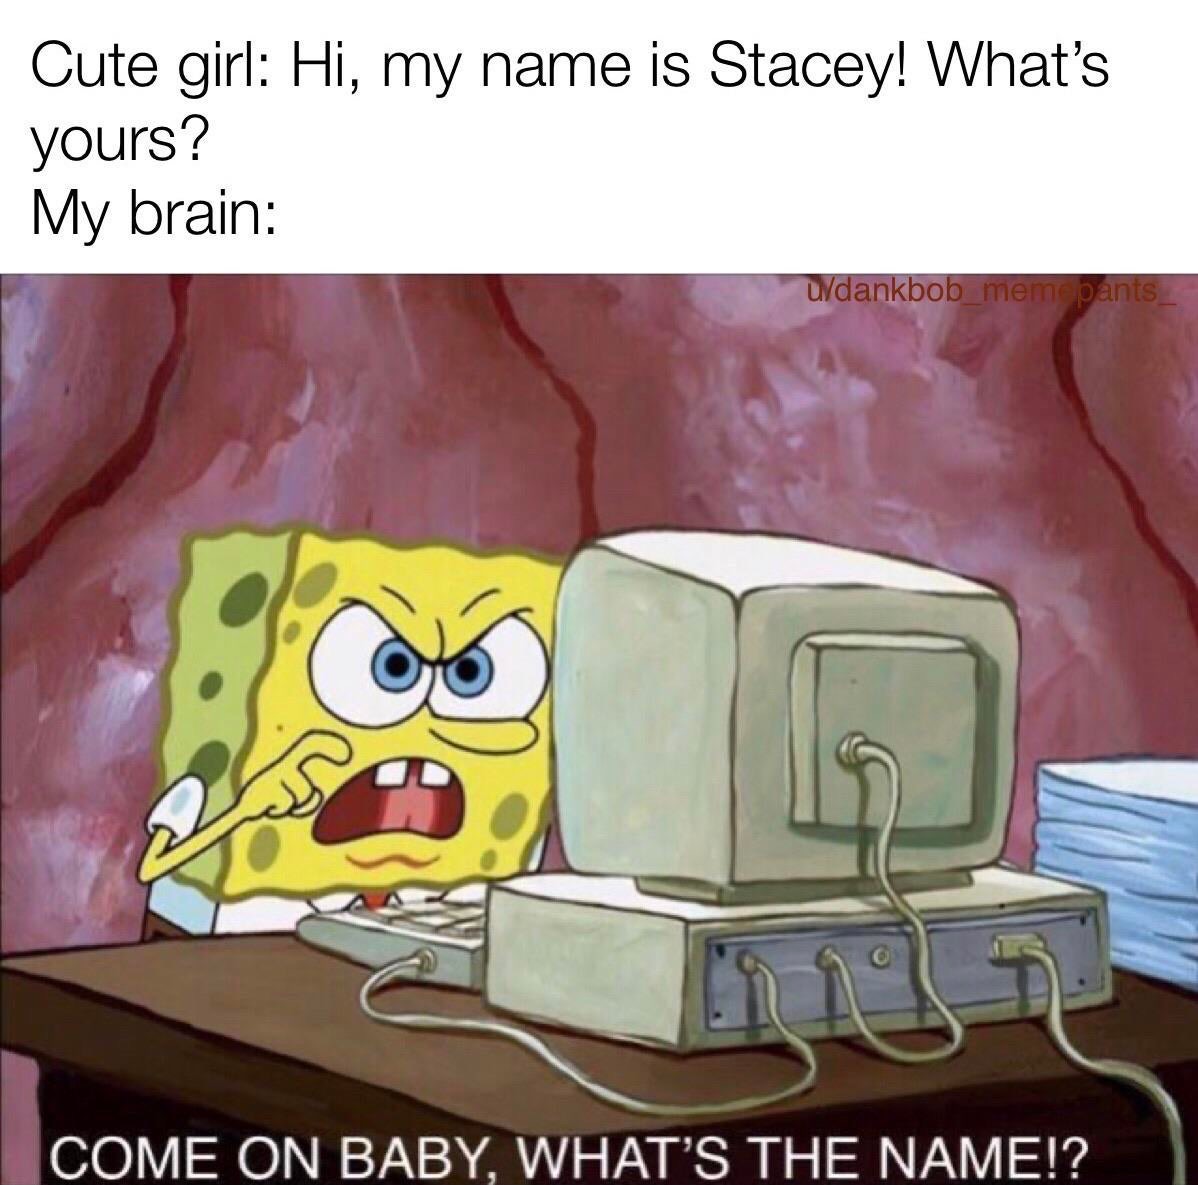 come on baby what's the name spongebob - Cute girl Hi, my name is Stacey! What's yours? My brain udankbob_meme pants Come On Baby, What'S The Name!?